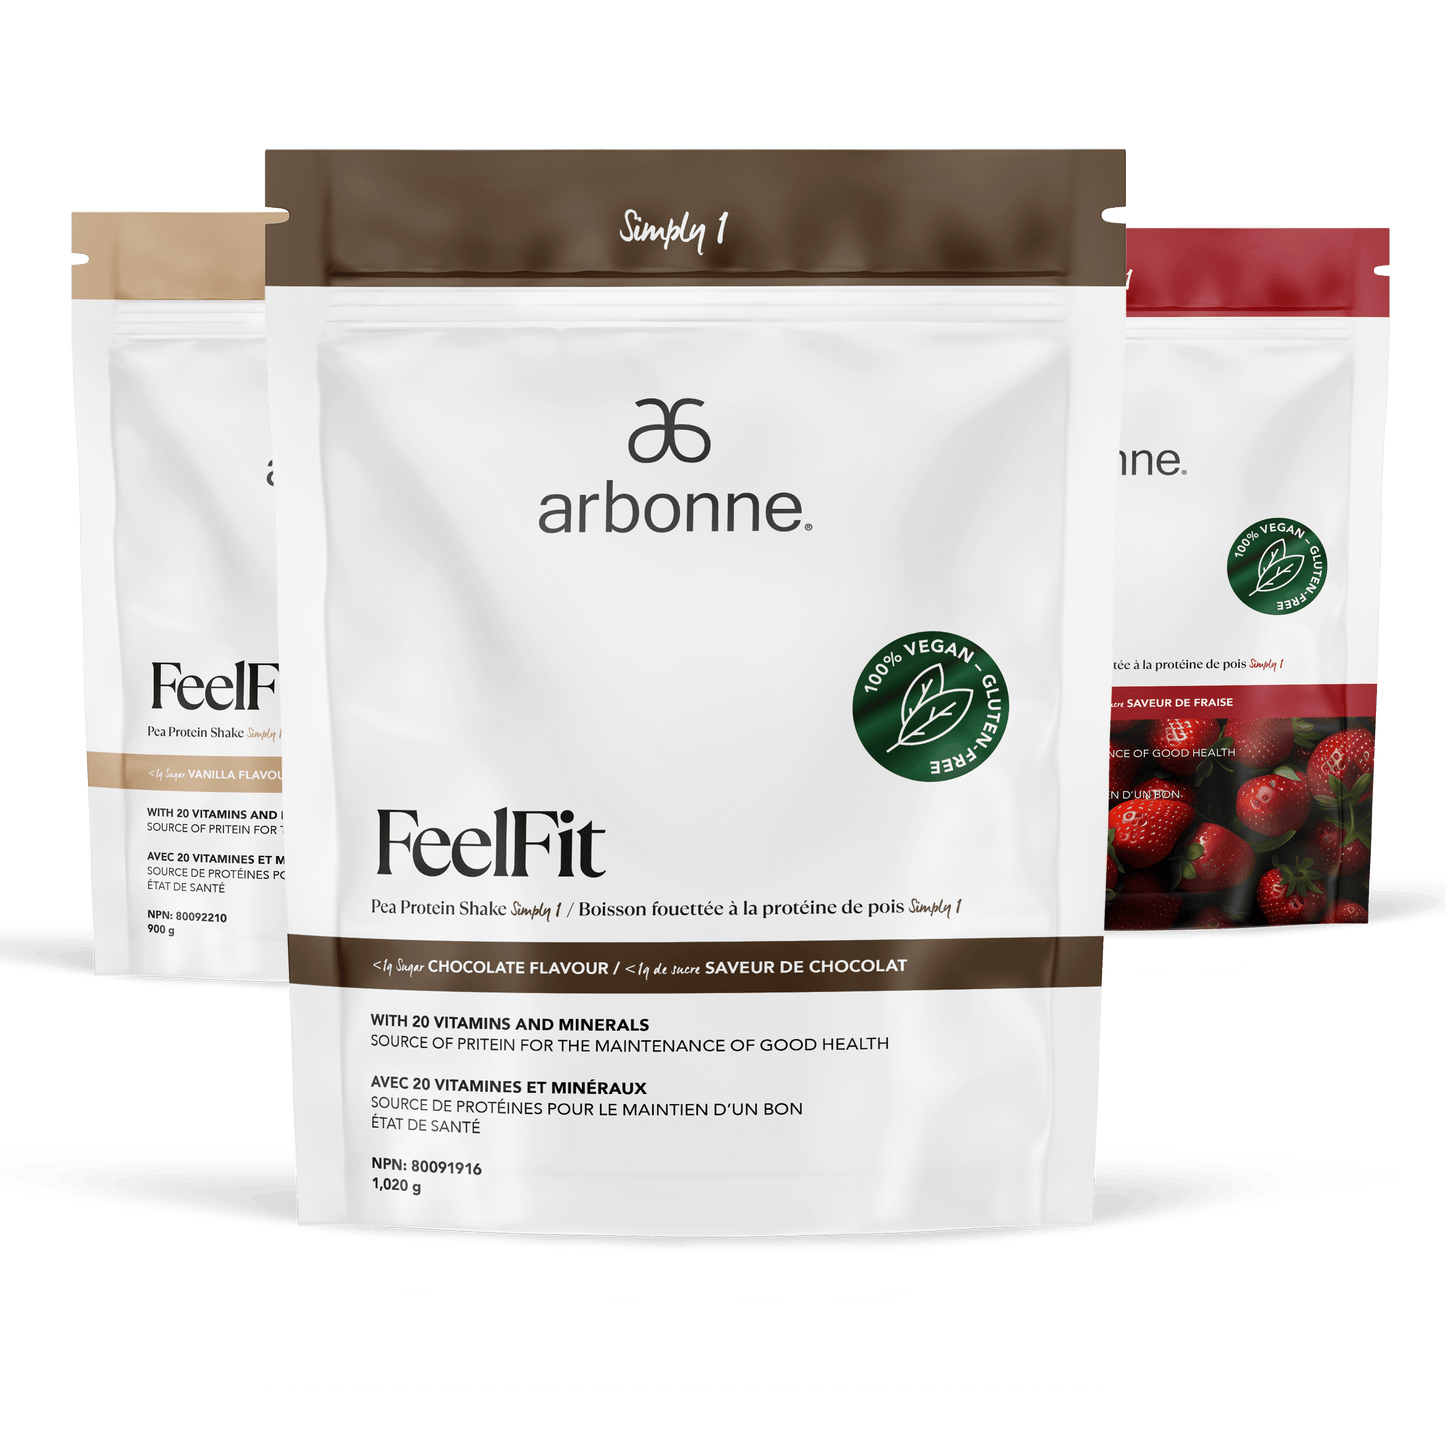 Arbonne FeelFit pea protein shake bags in vanilla and chocolate flavors, displayed with vegan and health benefit callouts.